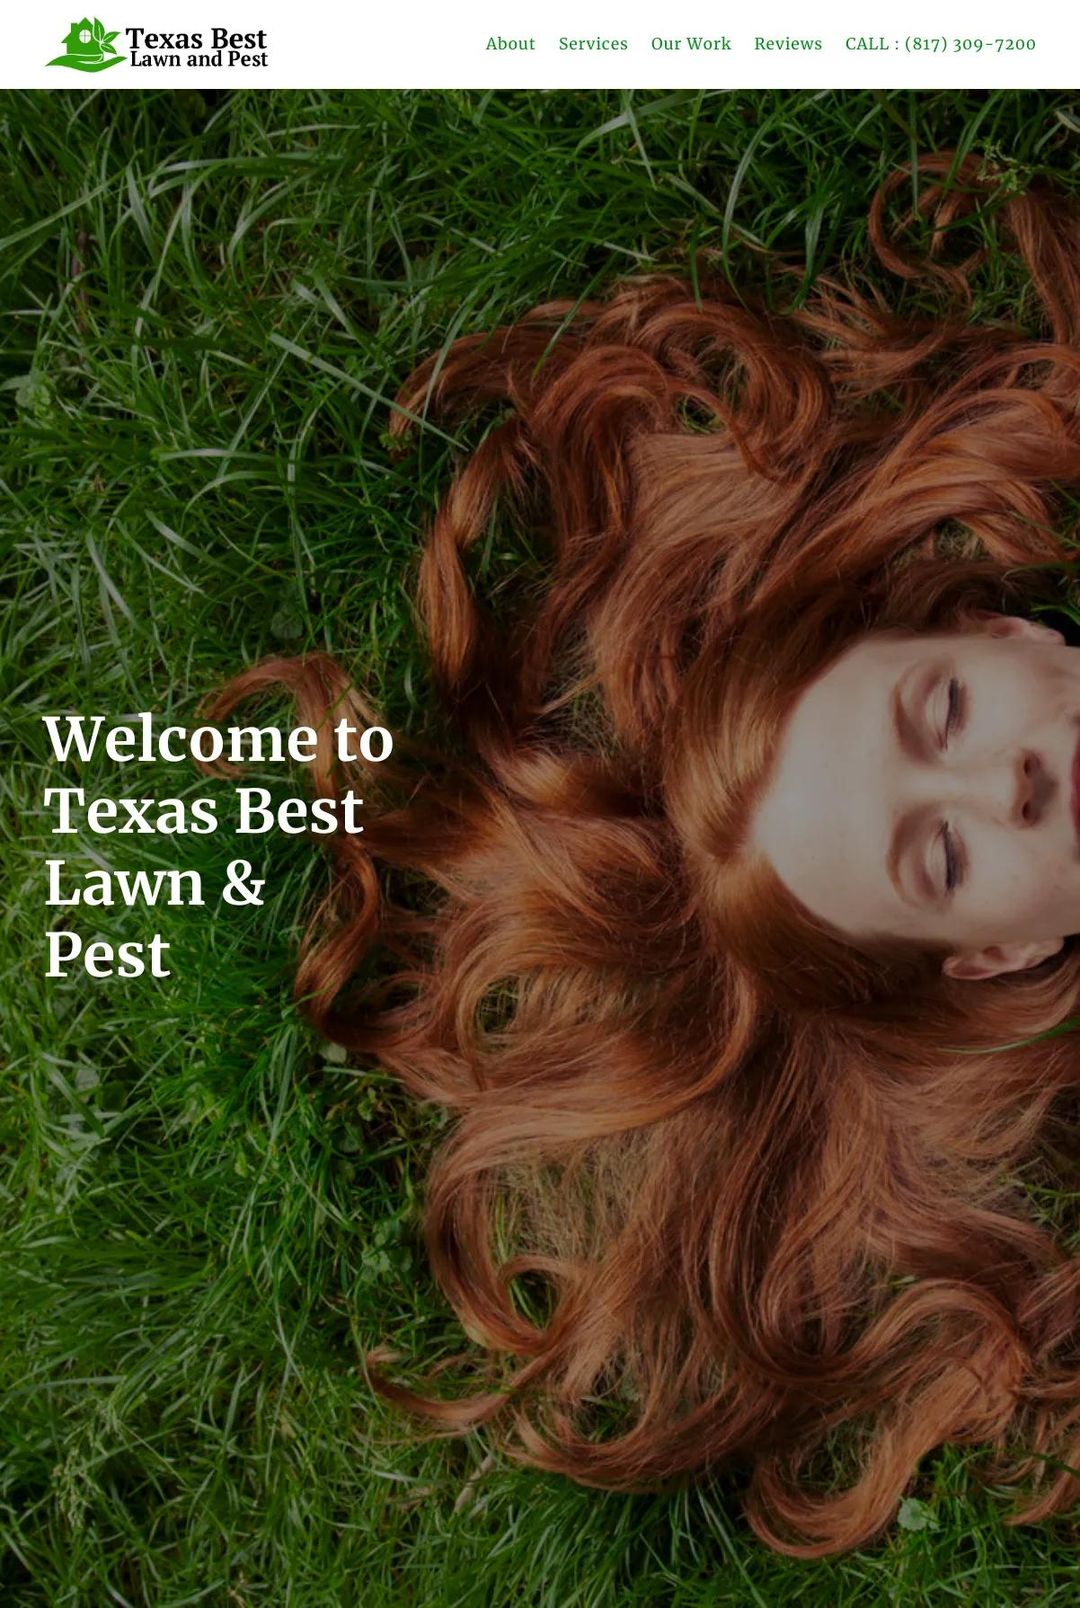 Screenshot 1 of Texas Best Lawn & Pest (Example Squarespace Lawn Care Website)